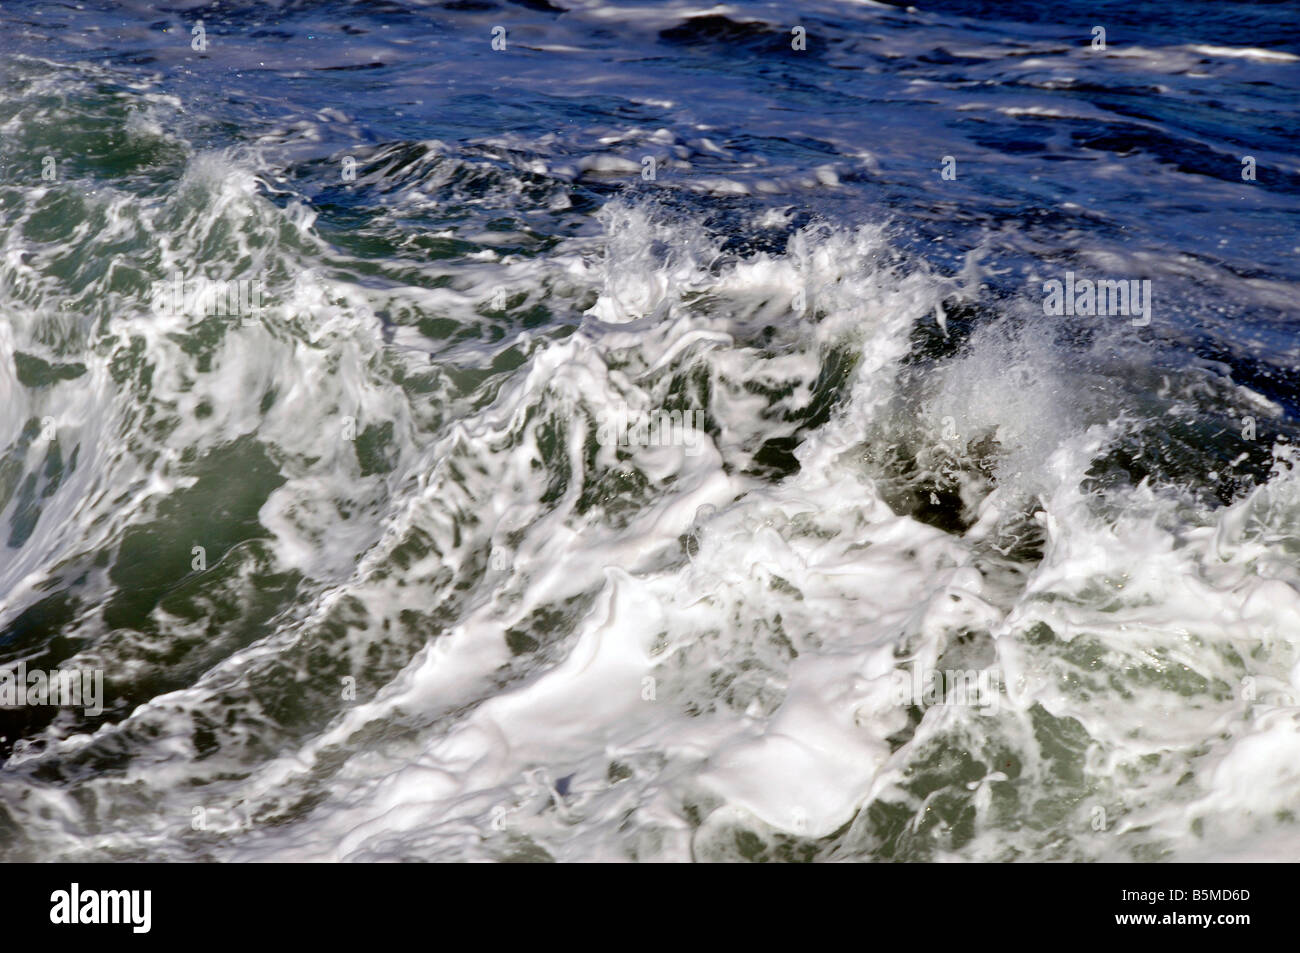 sea waves rough water wind detail stormy north sea curves bubbles churned white horses splashing Stock Photo